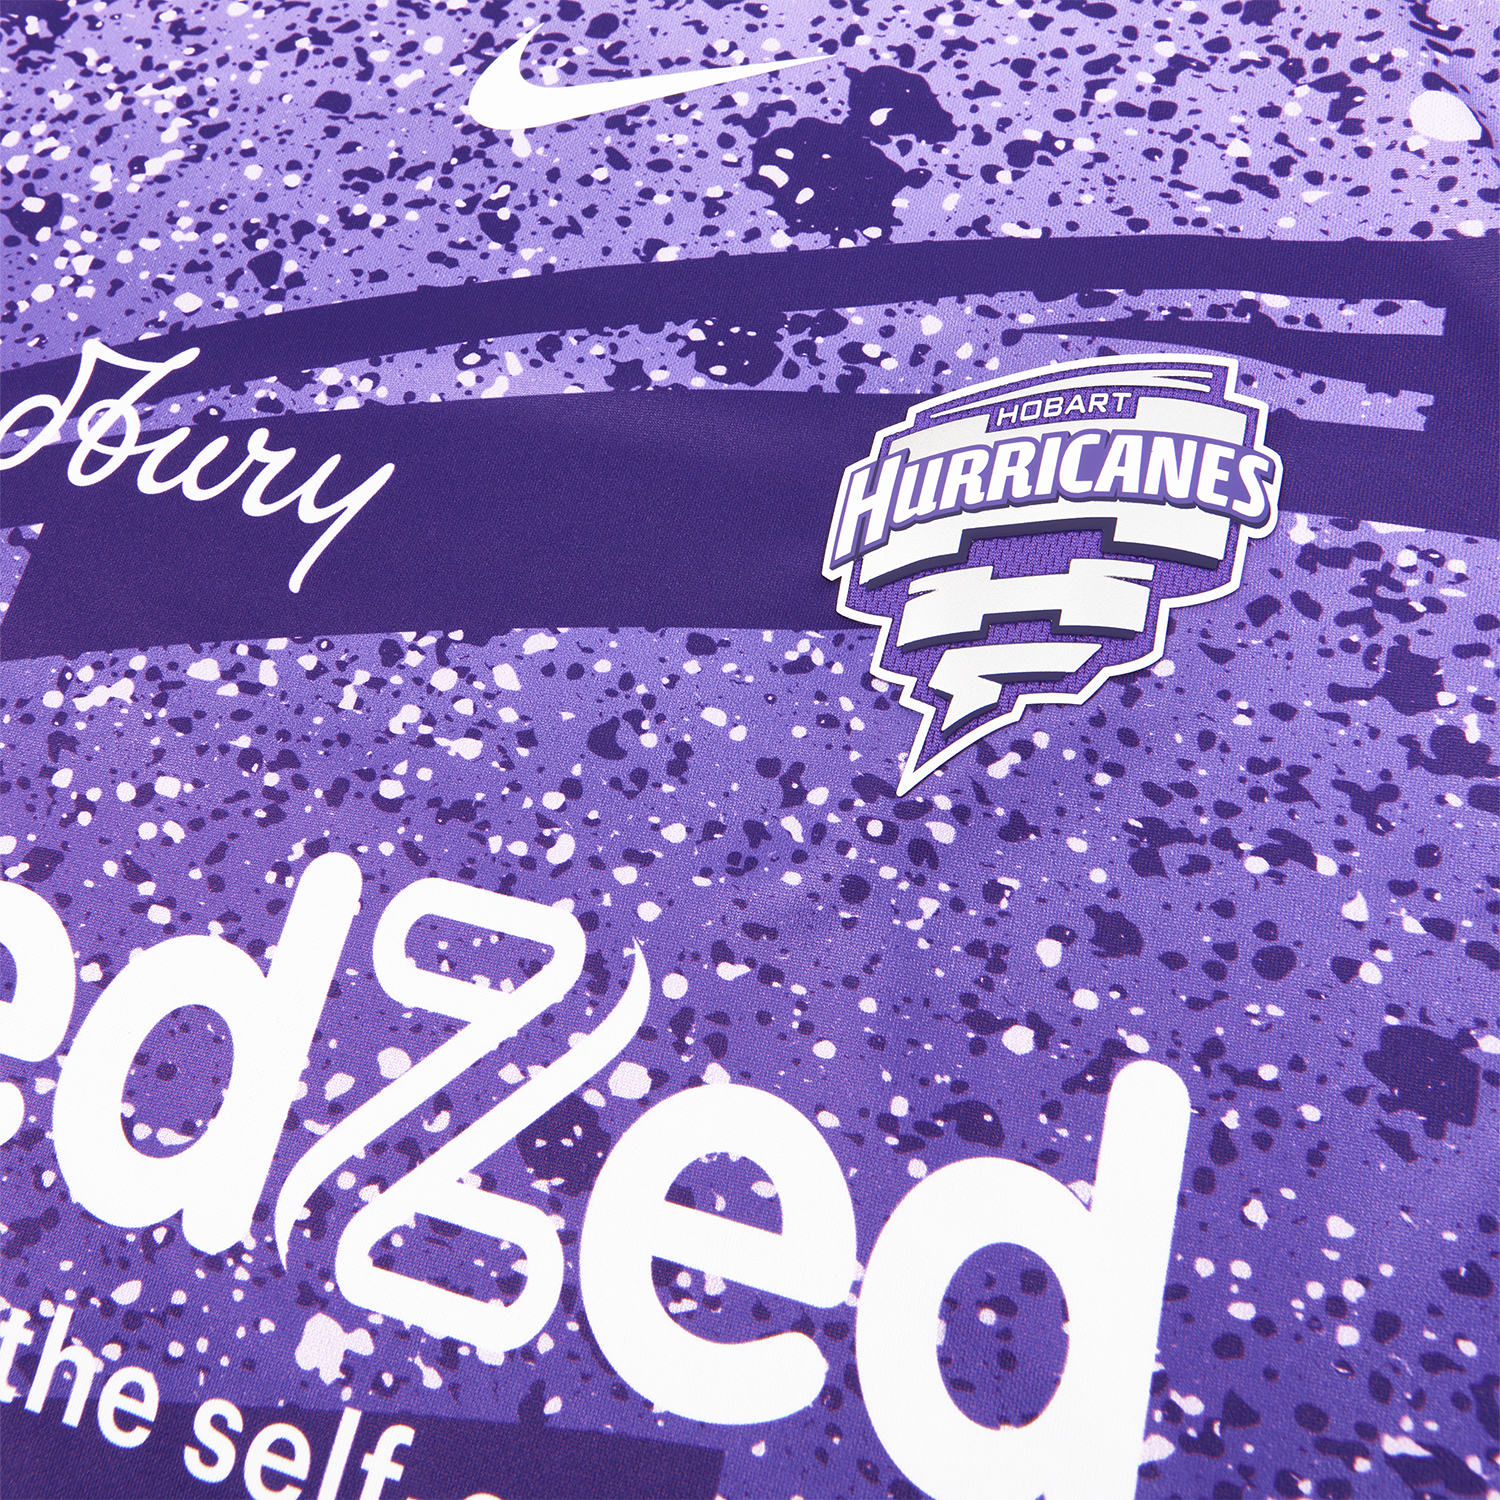 Hobart Hurricanes indigenous shirt to be worn for first time in Alice  Springs fixture